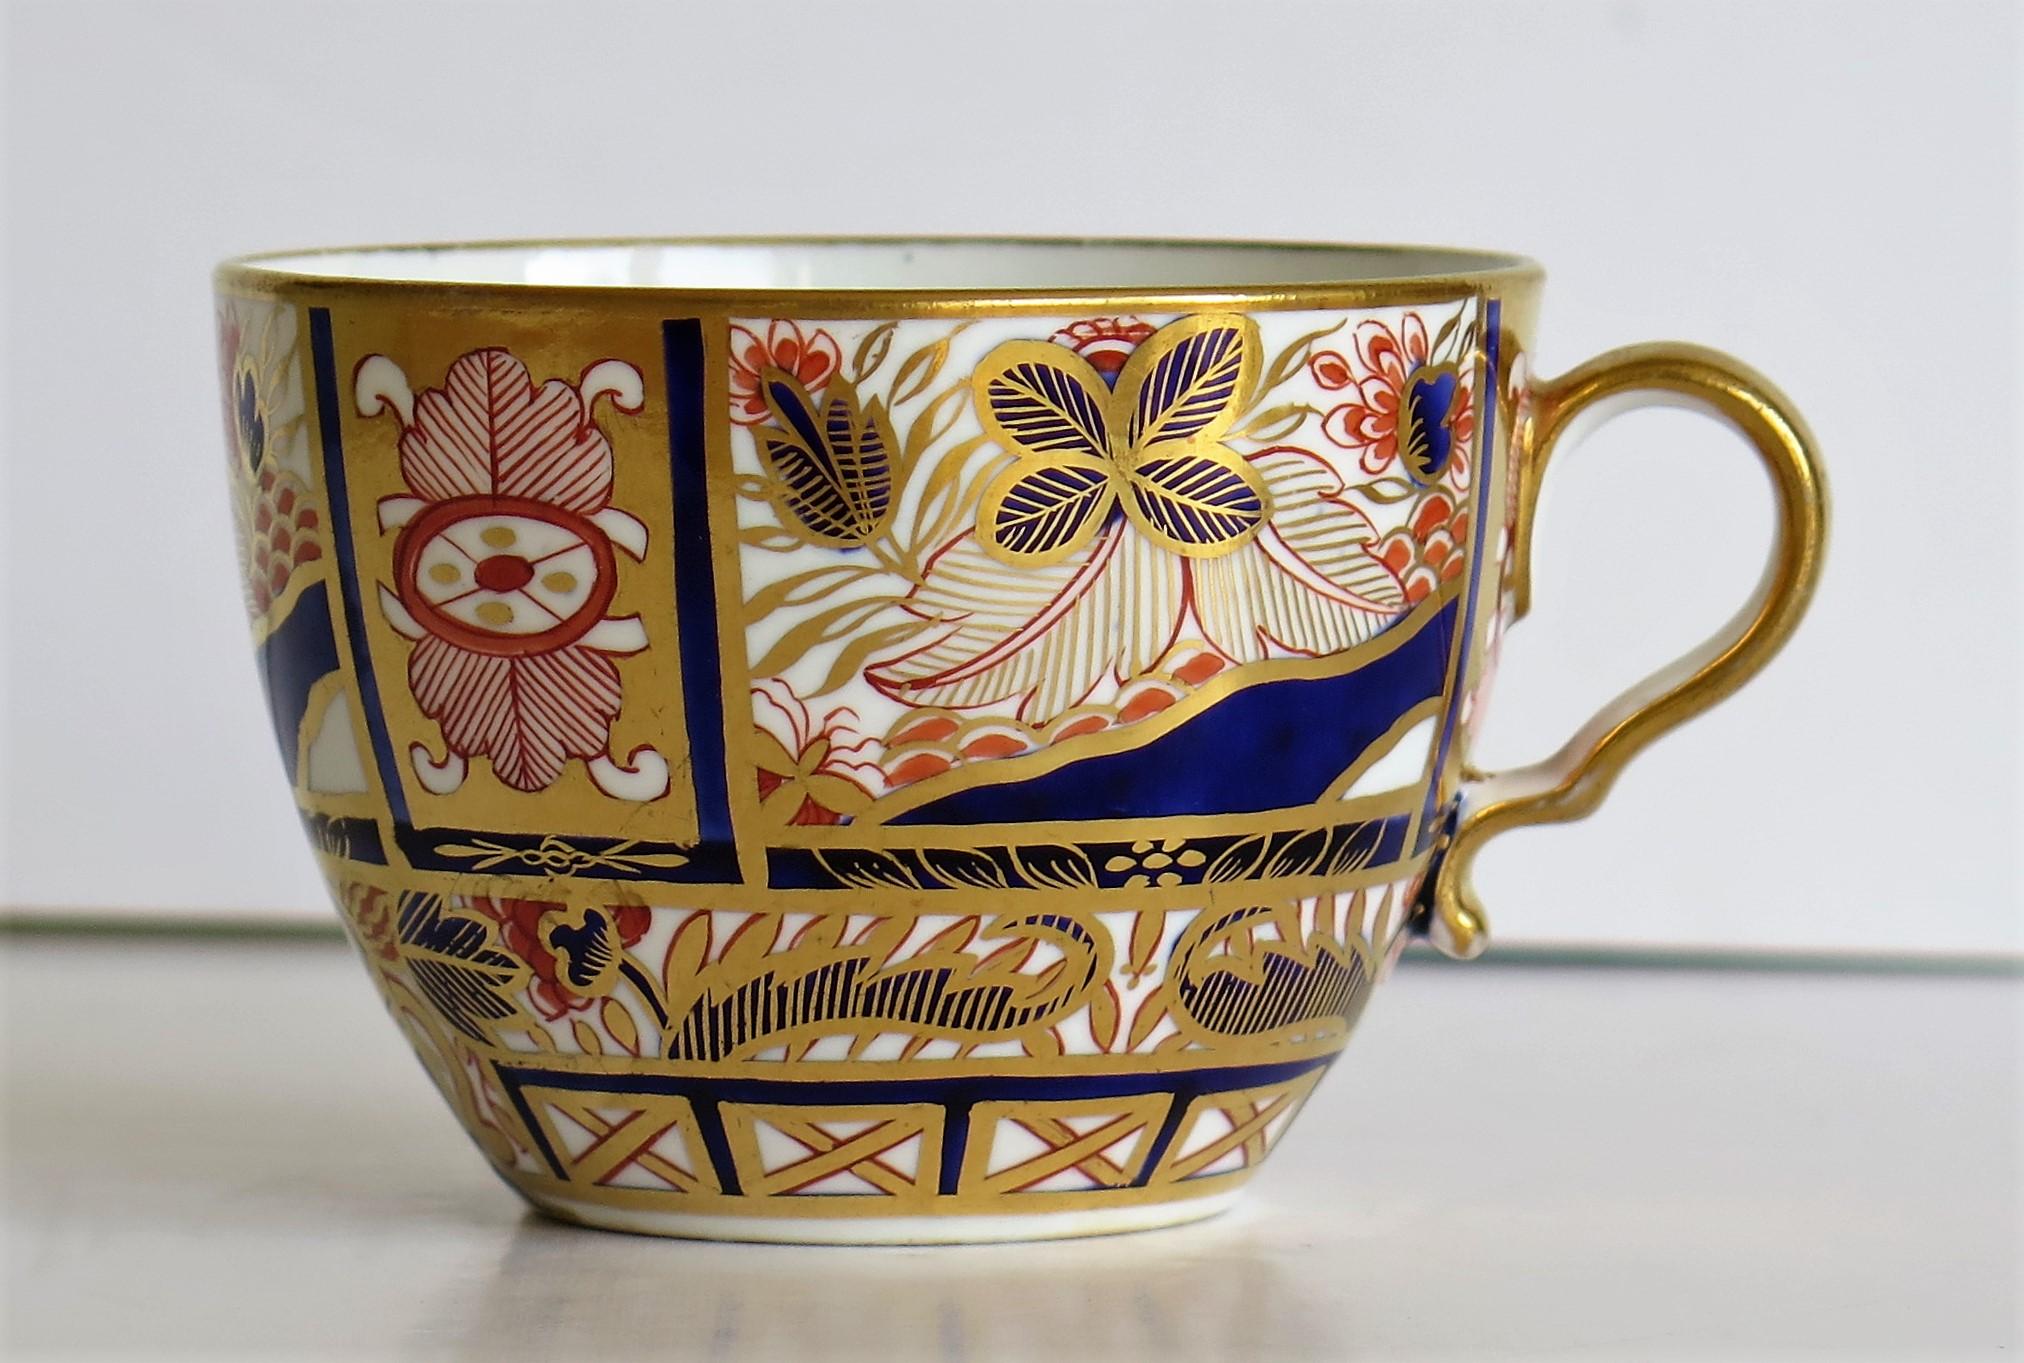 This is a fine example of an English George III period, SPODE porcelain, Tea Cup, hand painted in pattern 963 and dating from the early 19th century, circa 1810.

This tea cup has the 